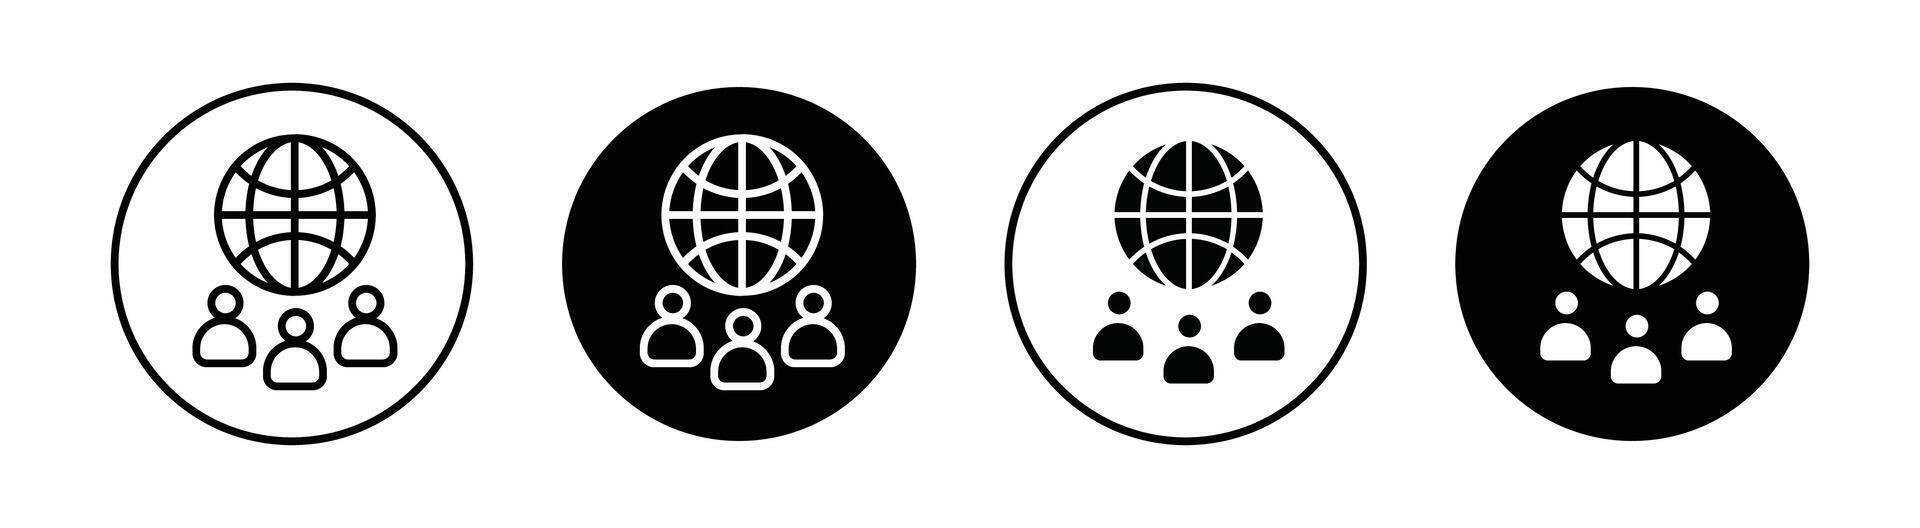 Clients worldwide icon vector